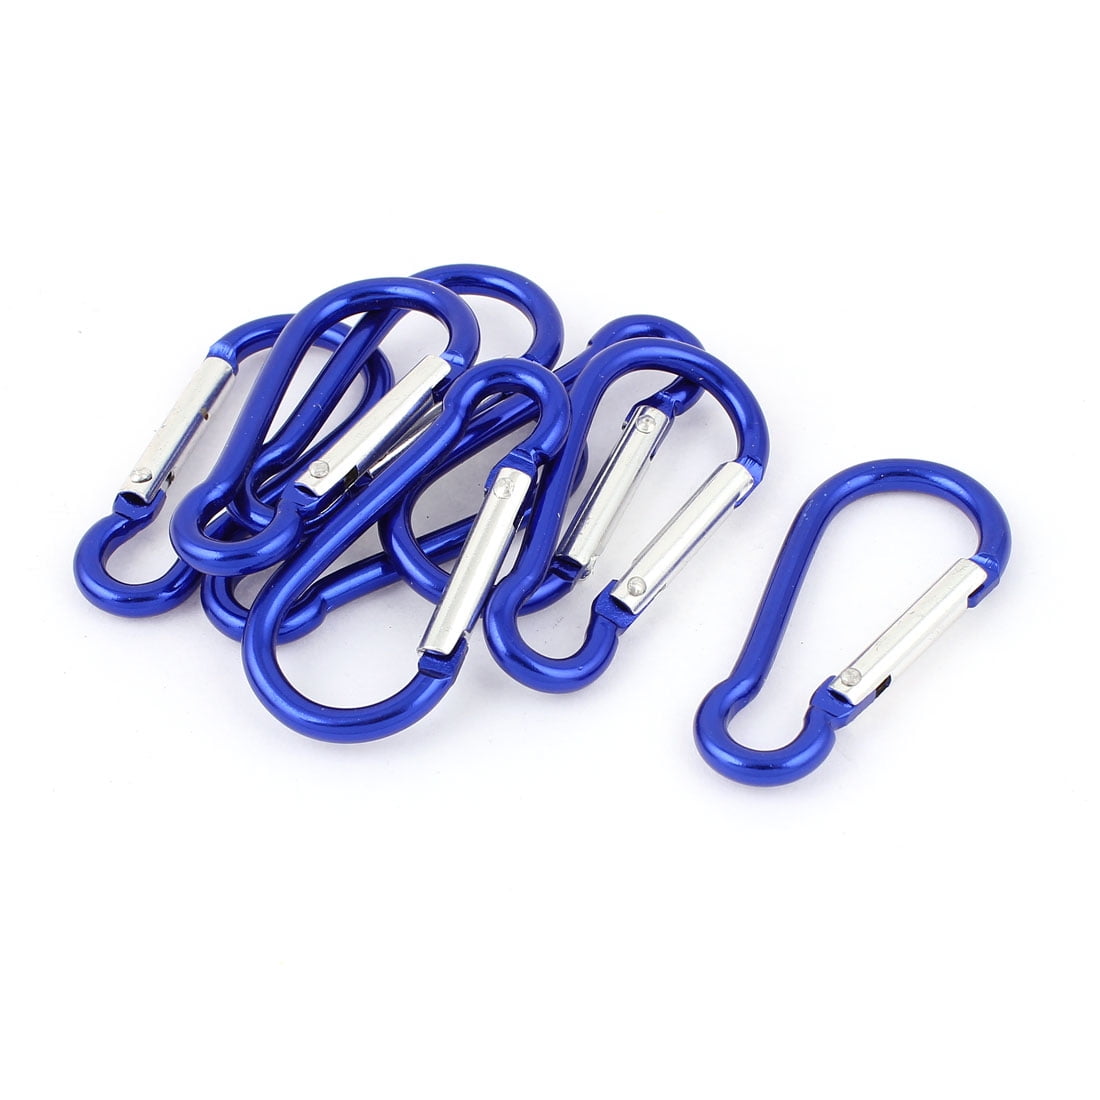 5 X Aluminum Carabiner Camp Spring Snap Hook Keychain Hiking Silver 4.8cm 